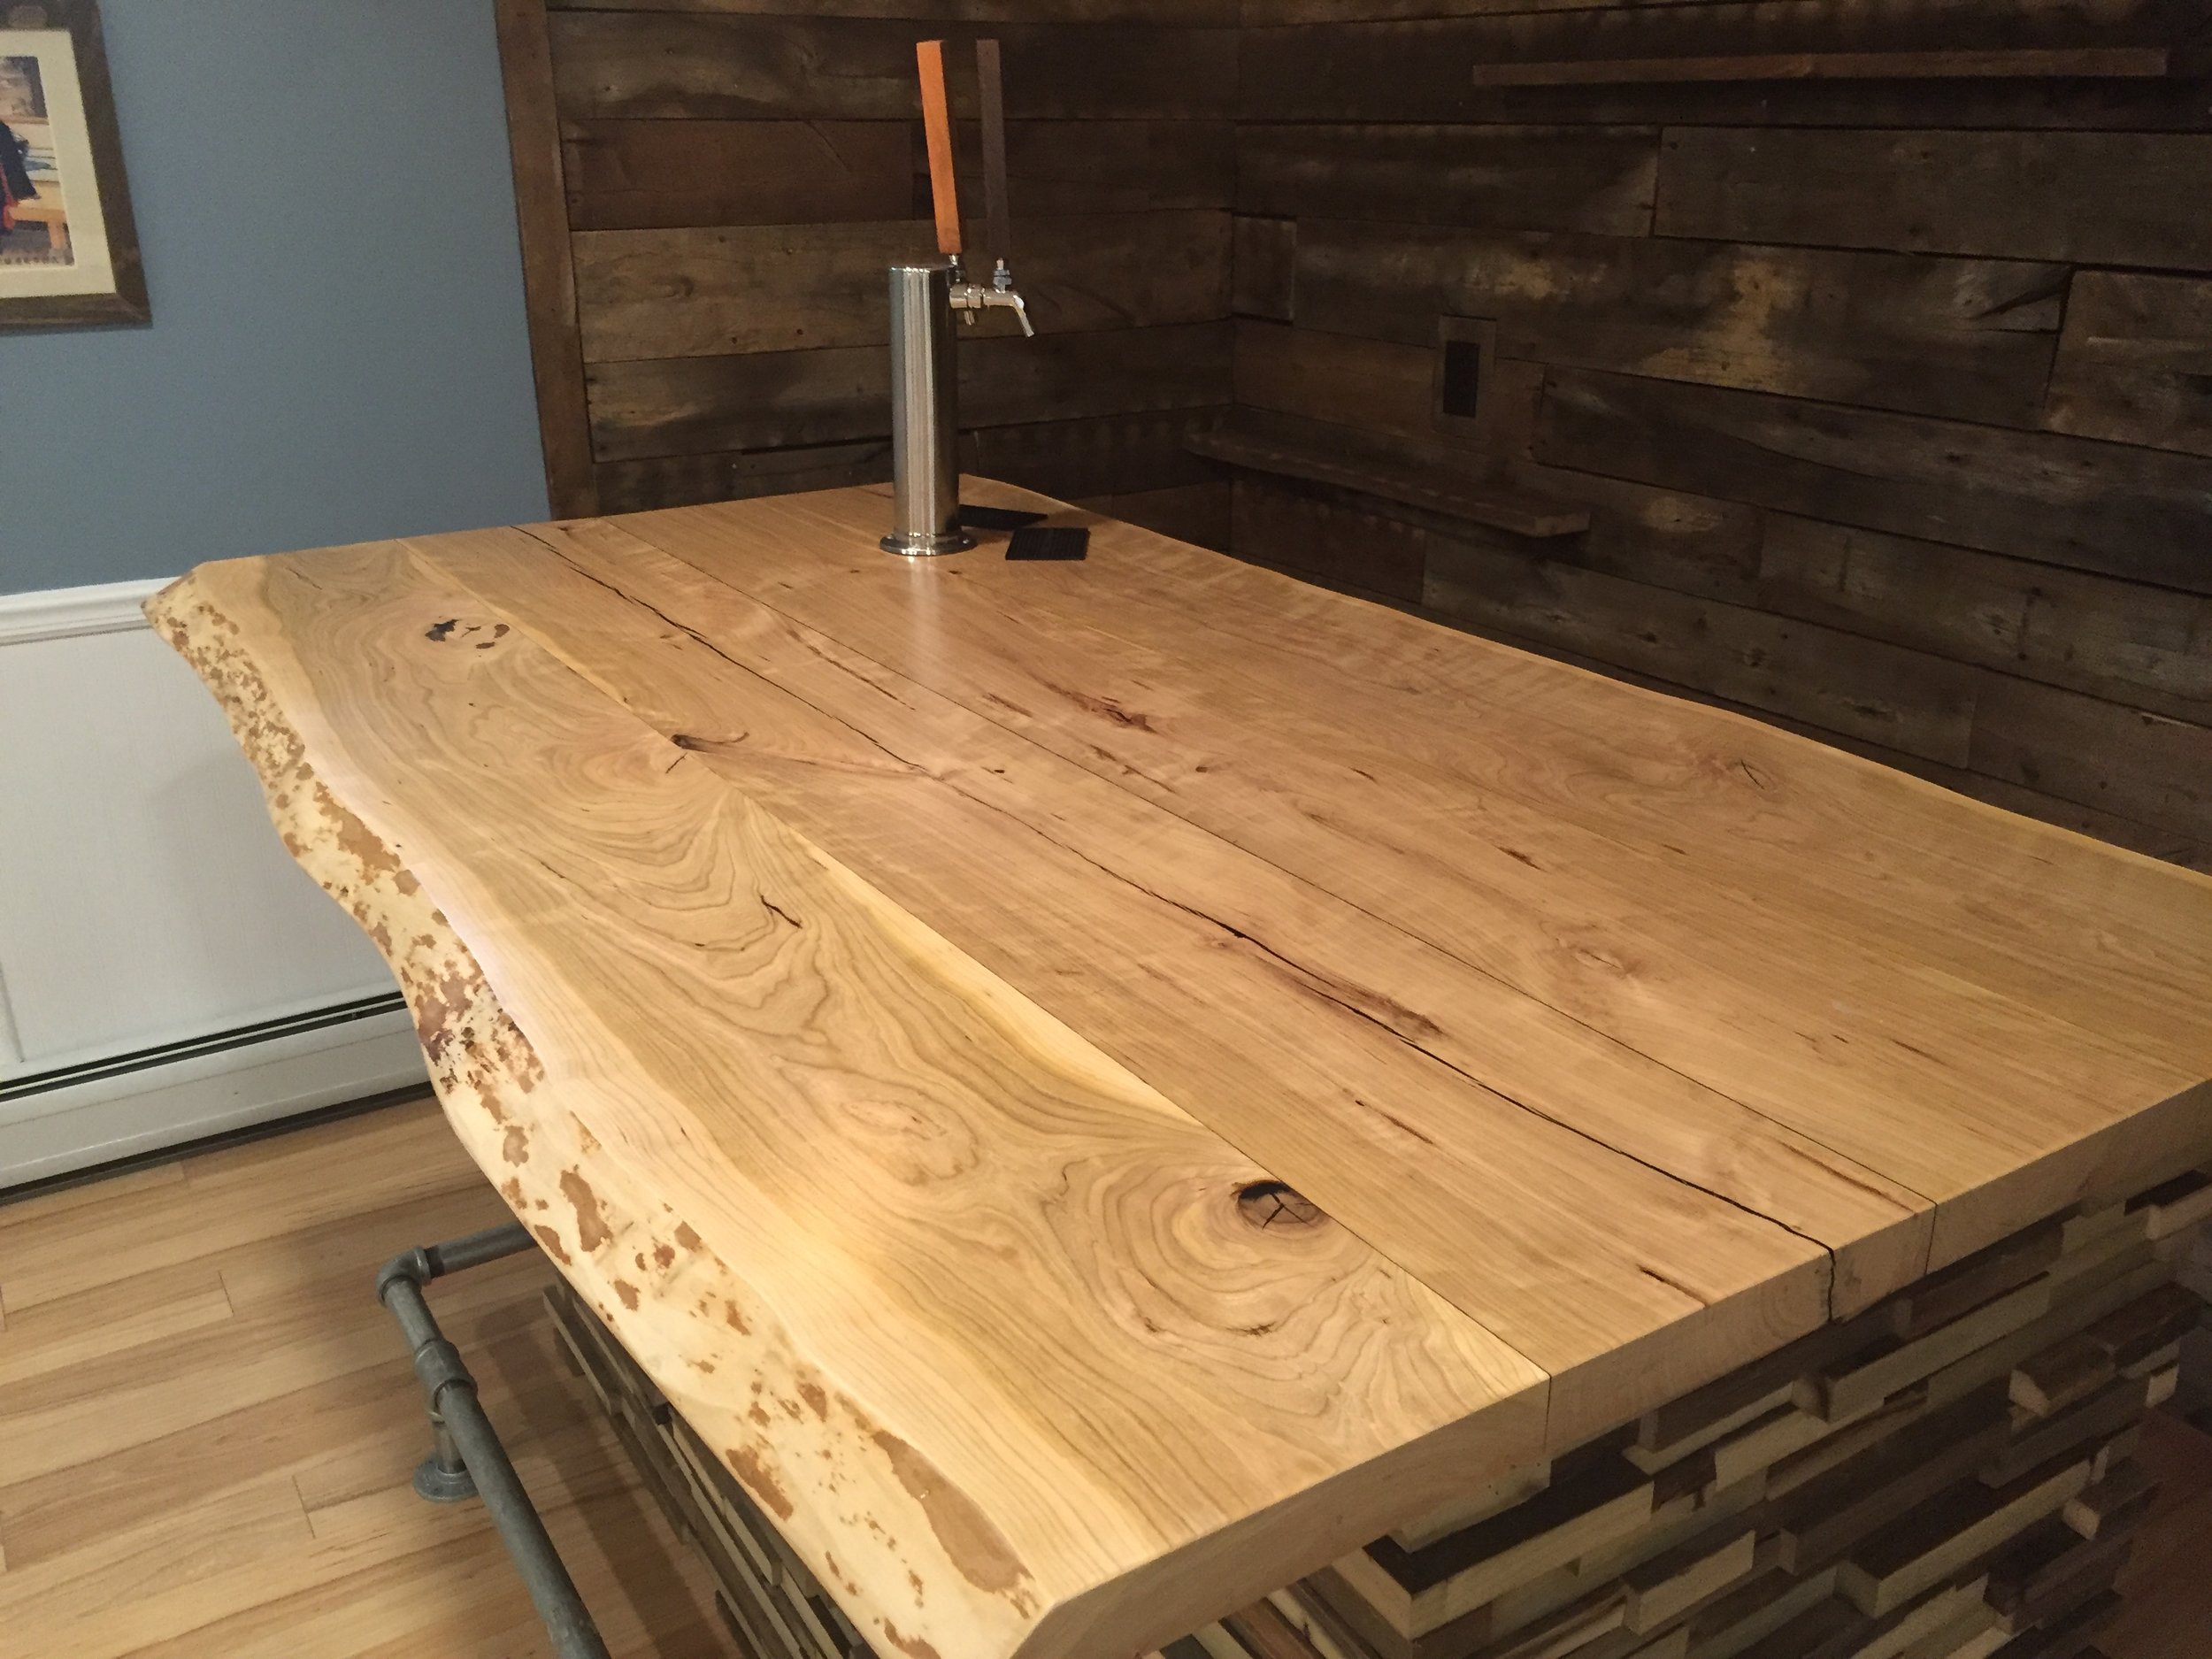  The finished hardwood bar with a built-in beer tap. 